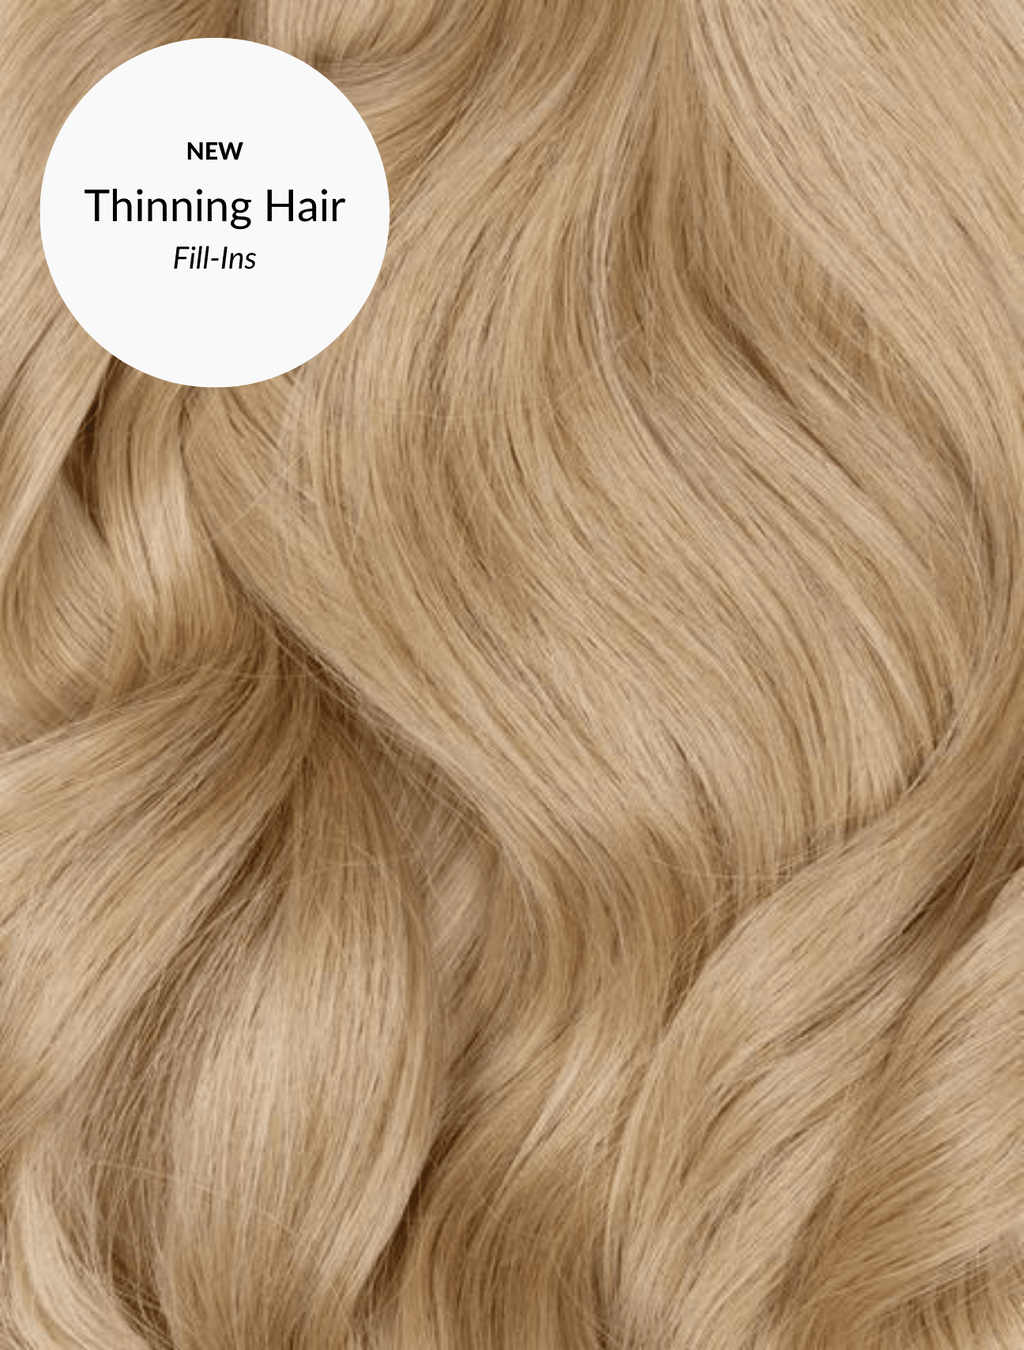 Dirty Blonde (9/19C) Thinning Hair Fill-Ins